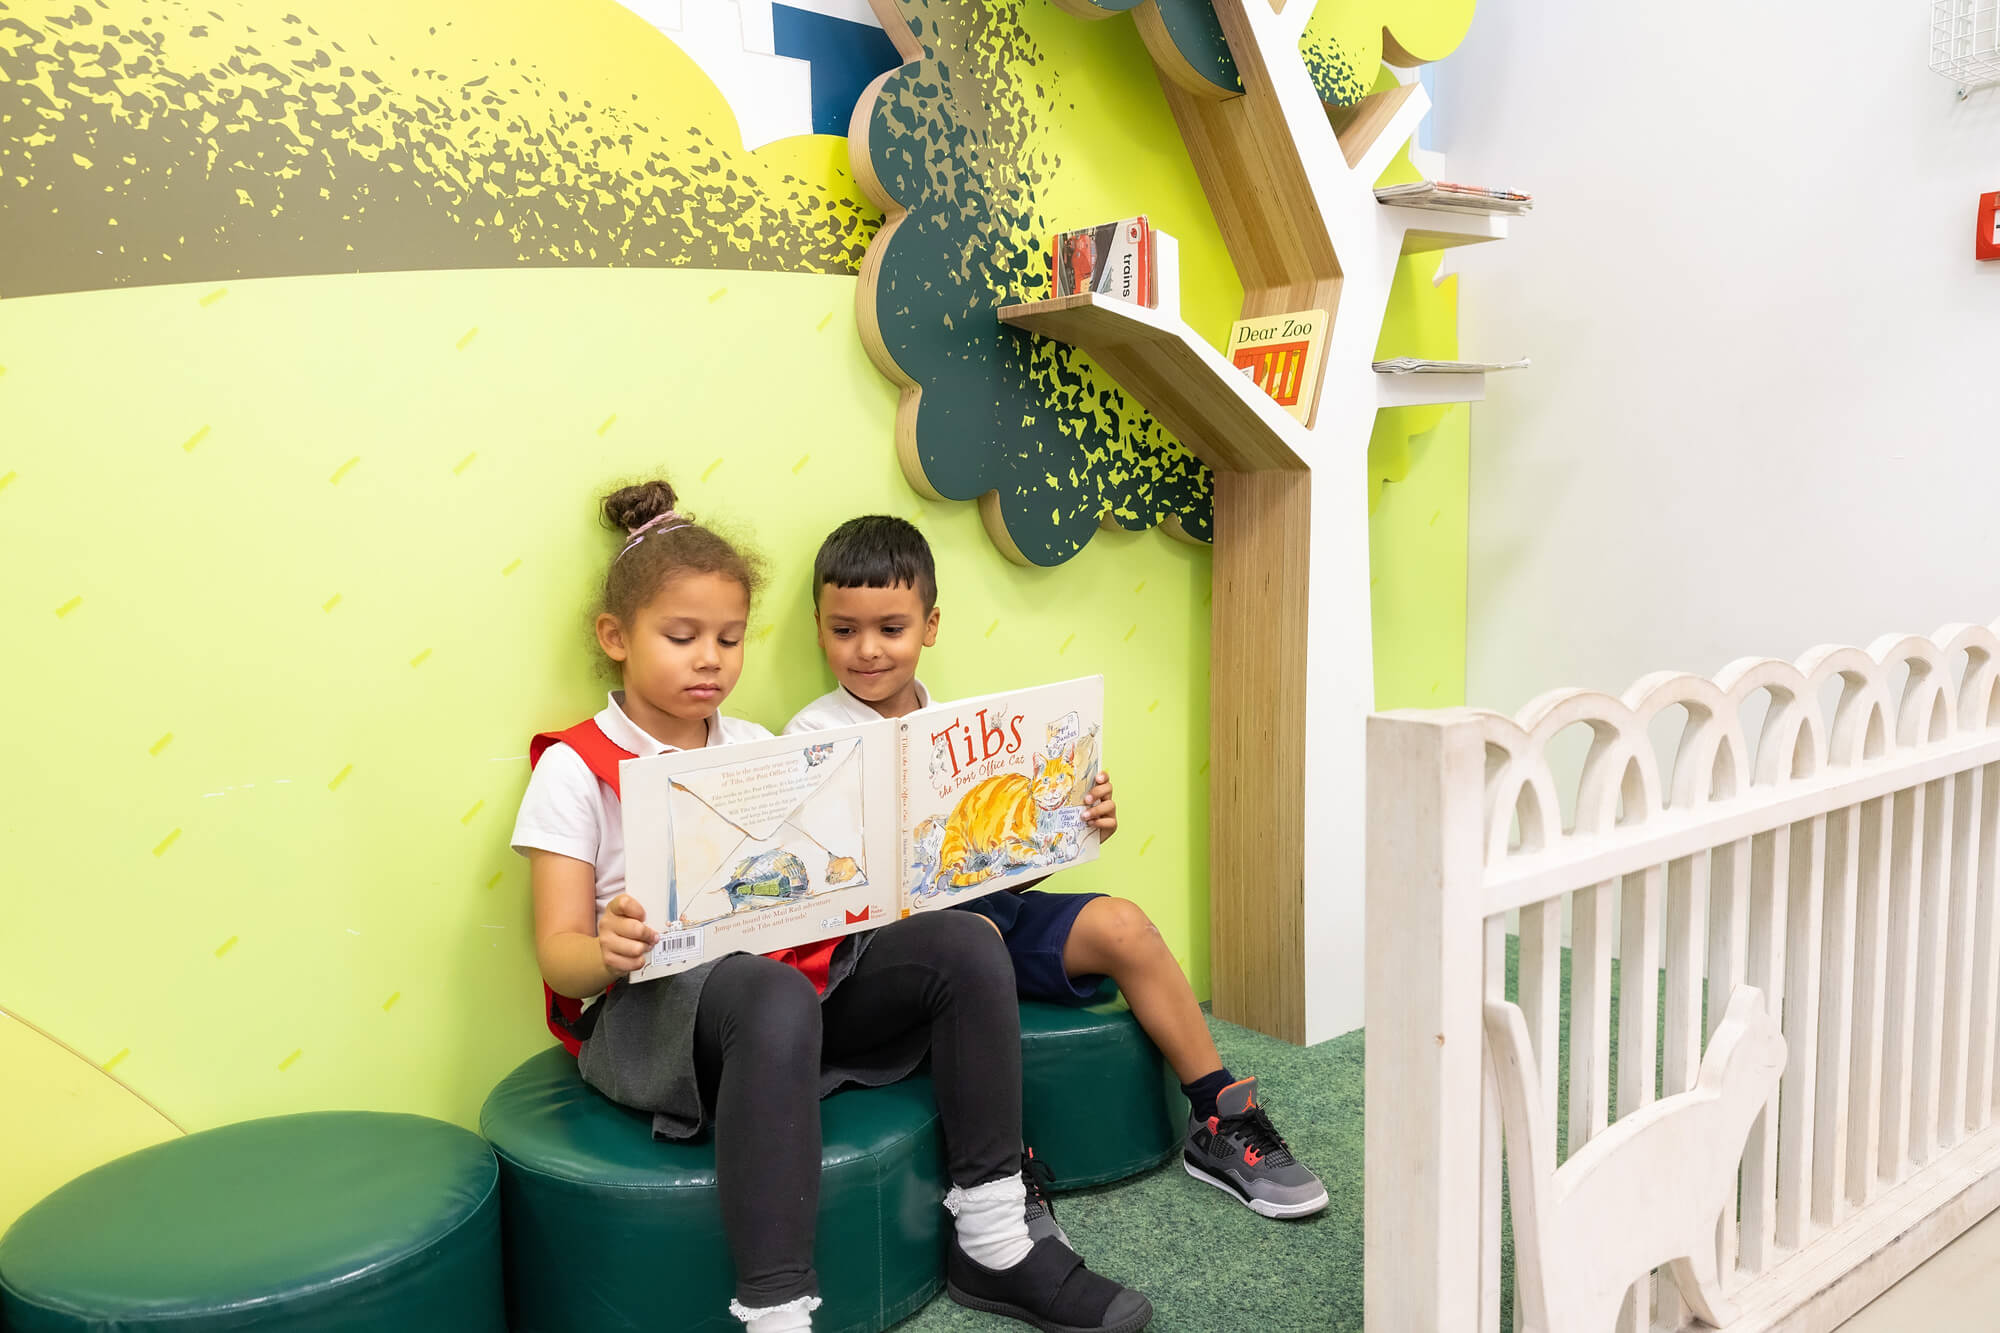 A young boy and girl sit reading in a green space, sat on comfy green stools. The both hold a side of the large book each. The boy is laughing, the girl is concentrating.